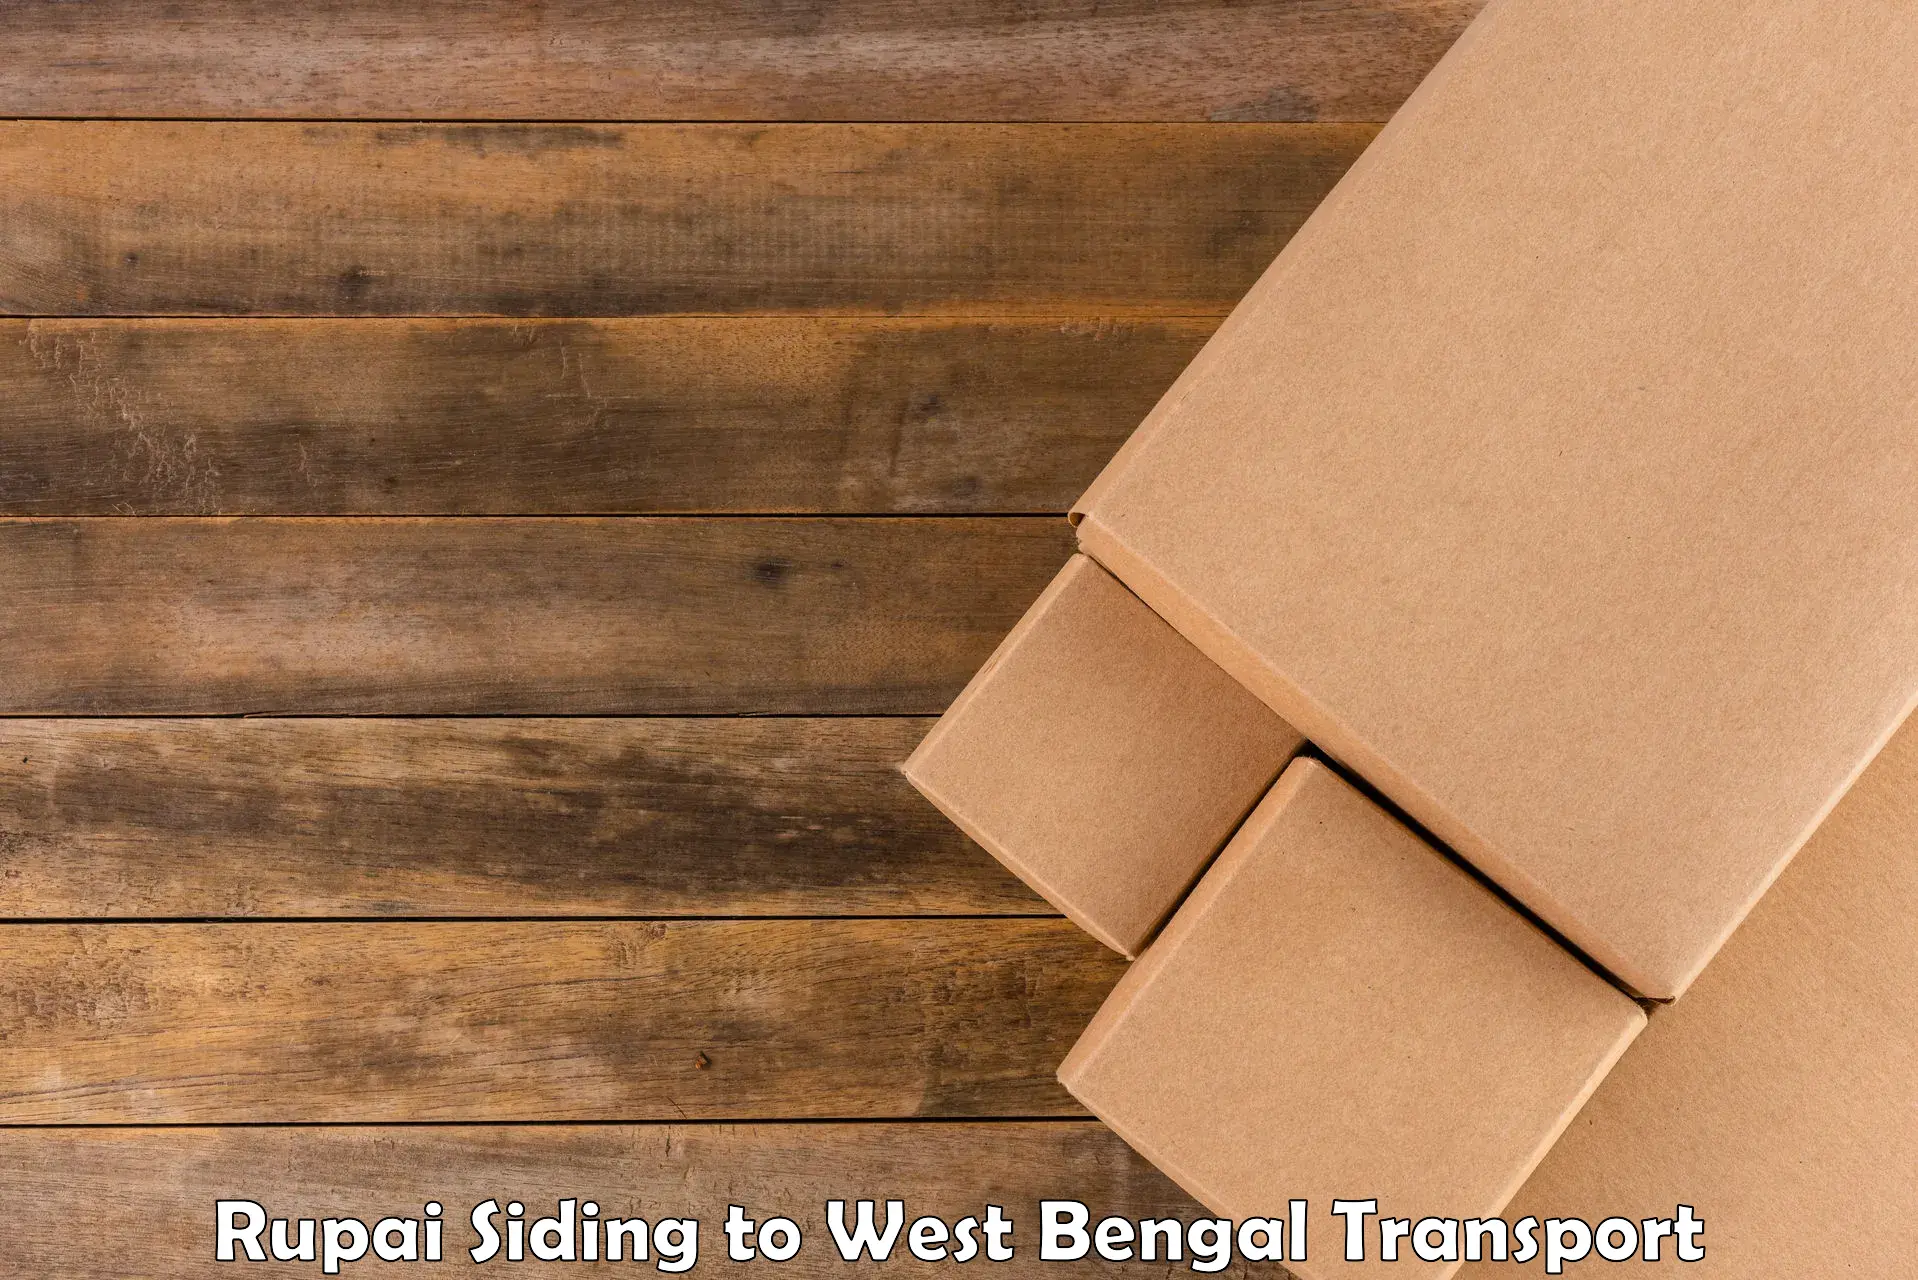 Truck transport companies in India Rupai Siding to Barrackpore